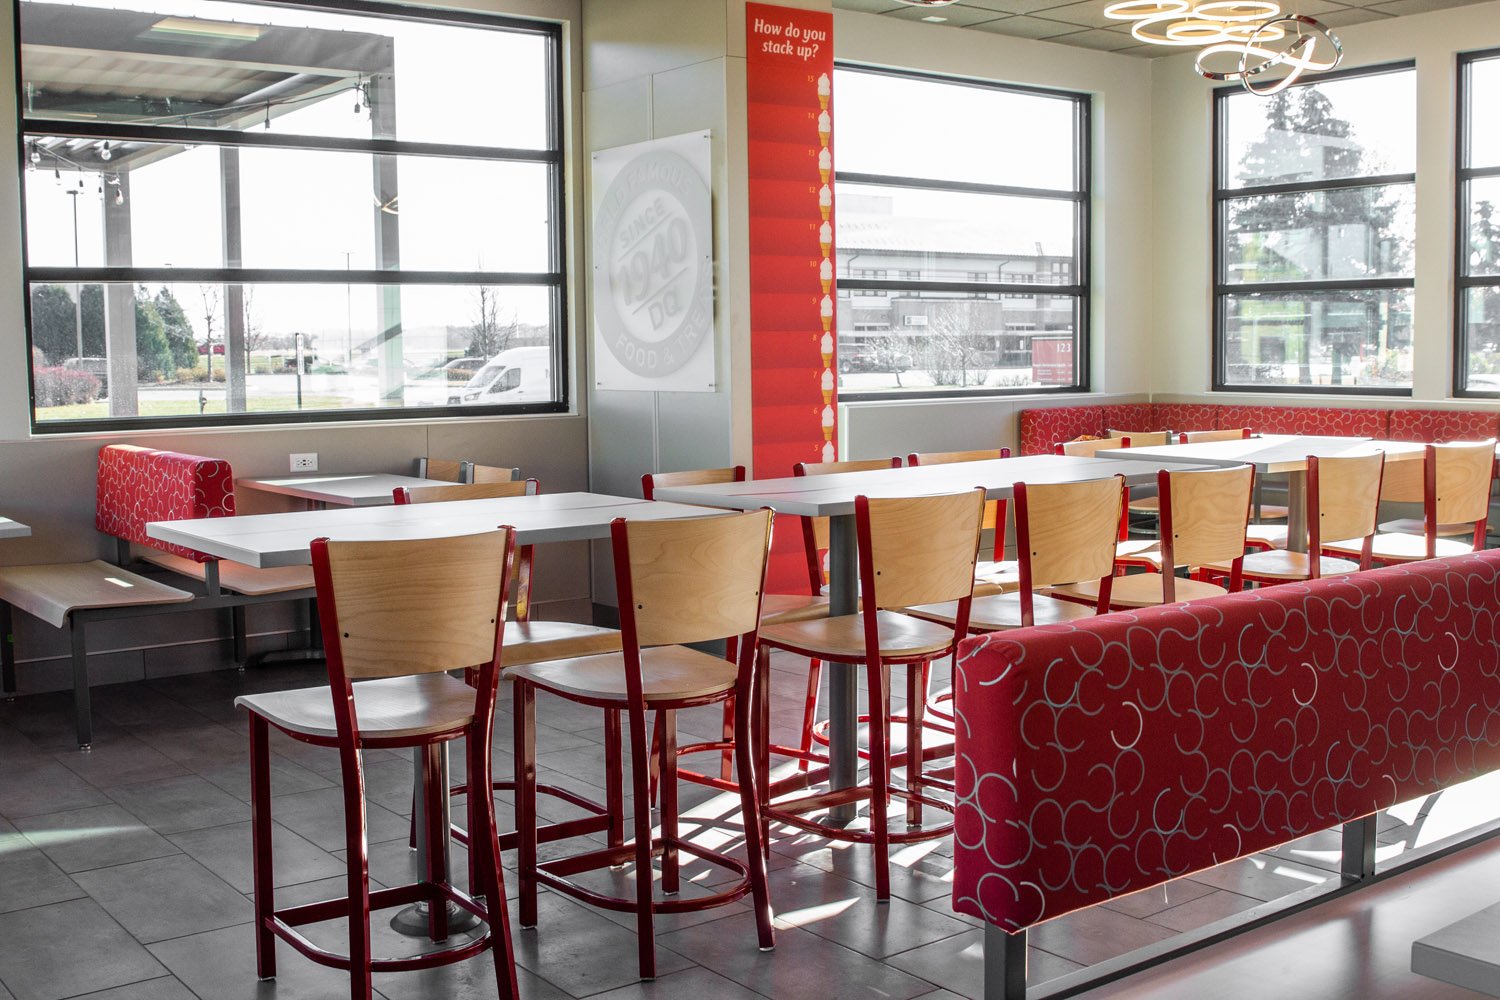 Dairy Queen completed dining room installation